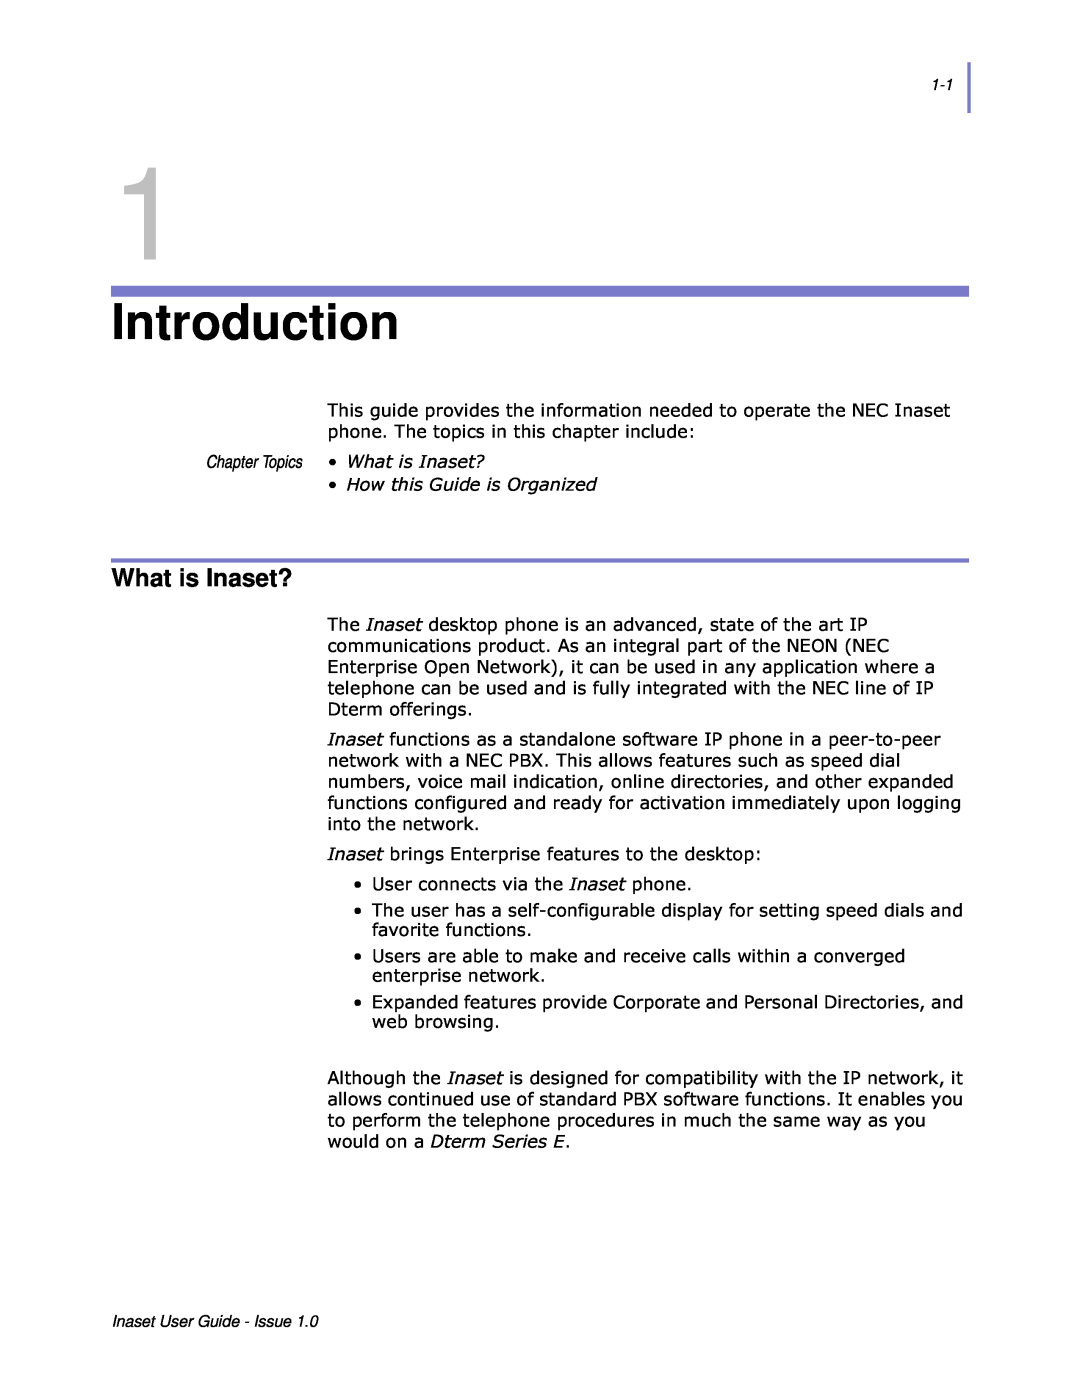 NEC NEAX 2000 IPS Introduction, What is Inaset?, Chapter Topics ‡ KDWLV,QDVHW ‡ +RZWKLV*XLGHLV2UJDQLHG, Whupriihulqjv 